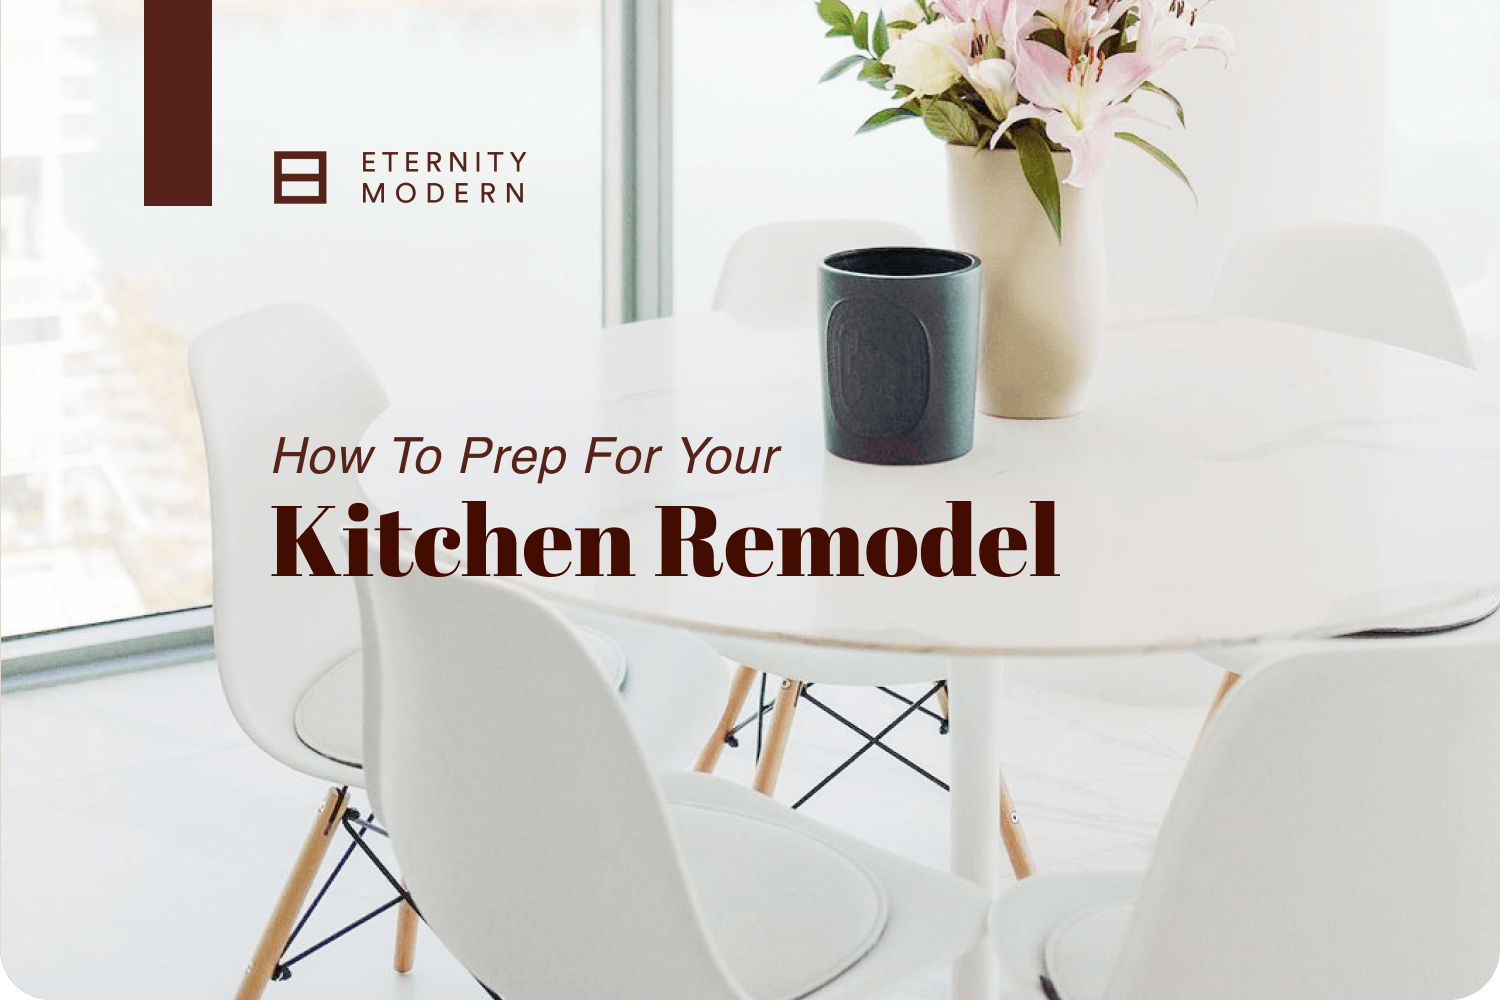 What to Consider Before Remodeling Your Kitchen